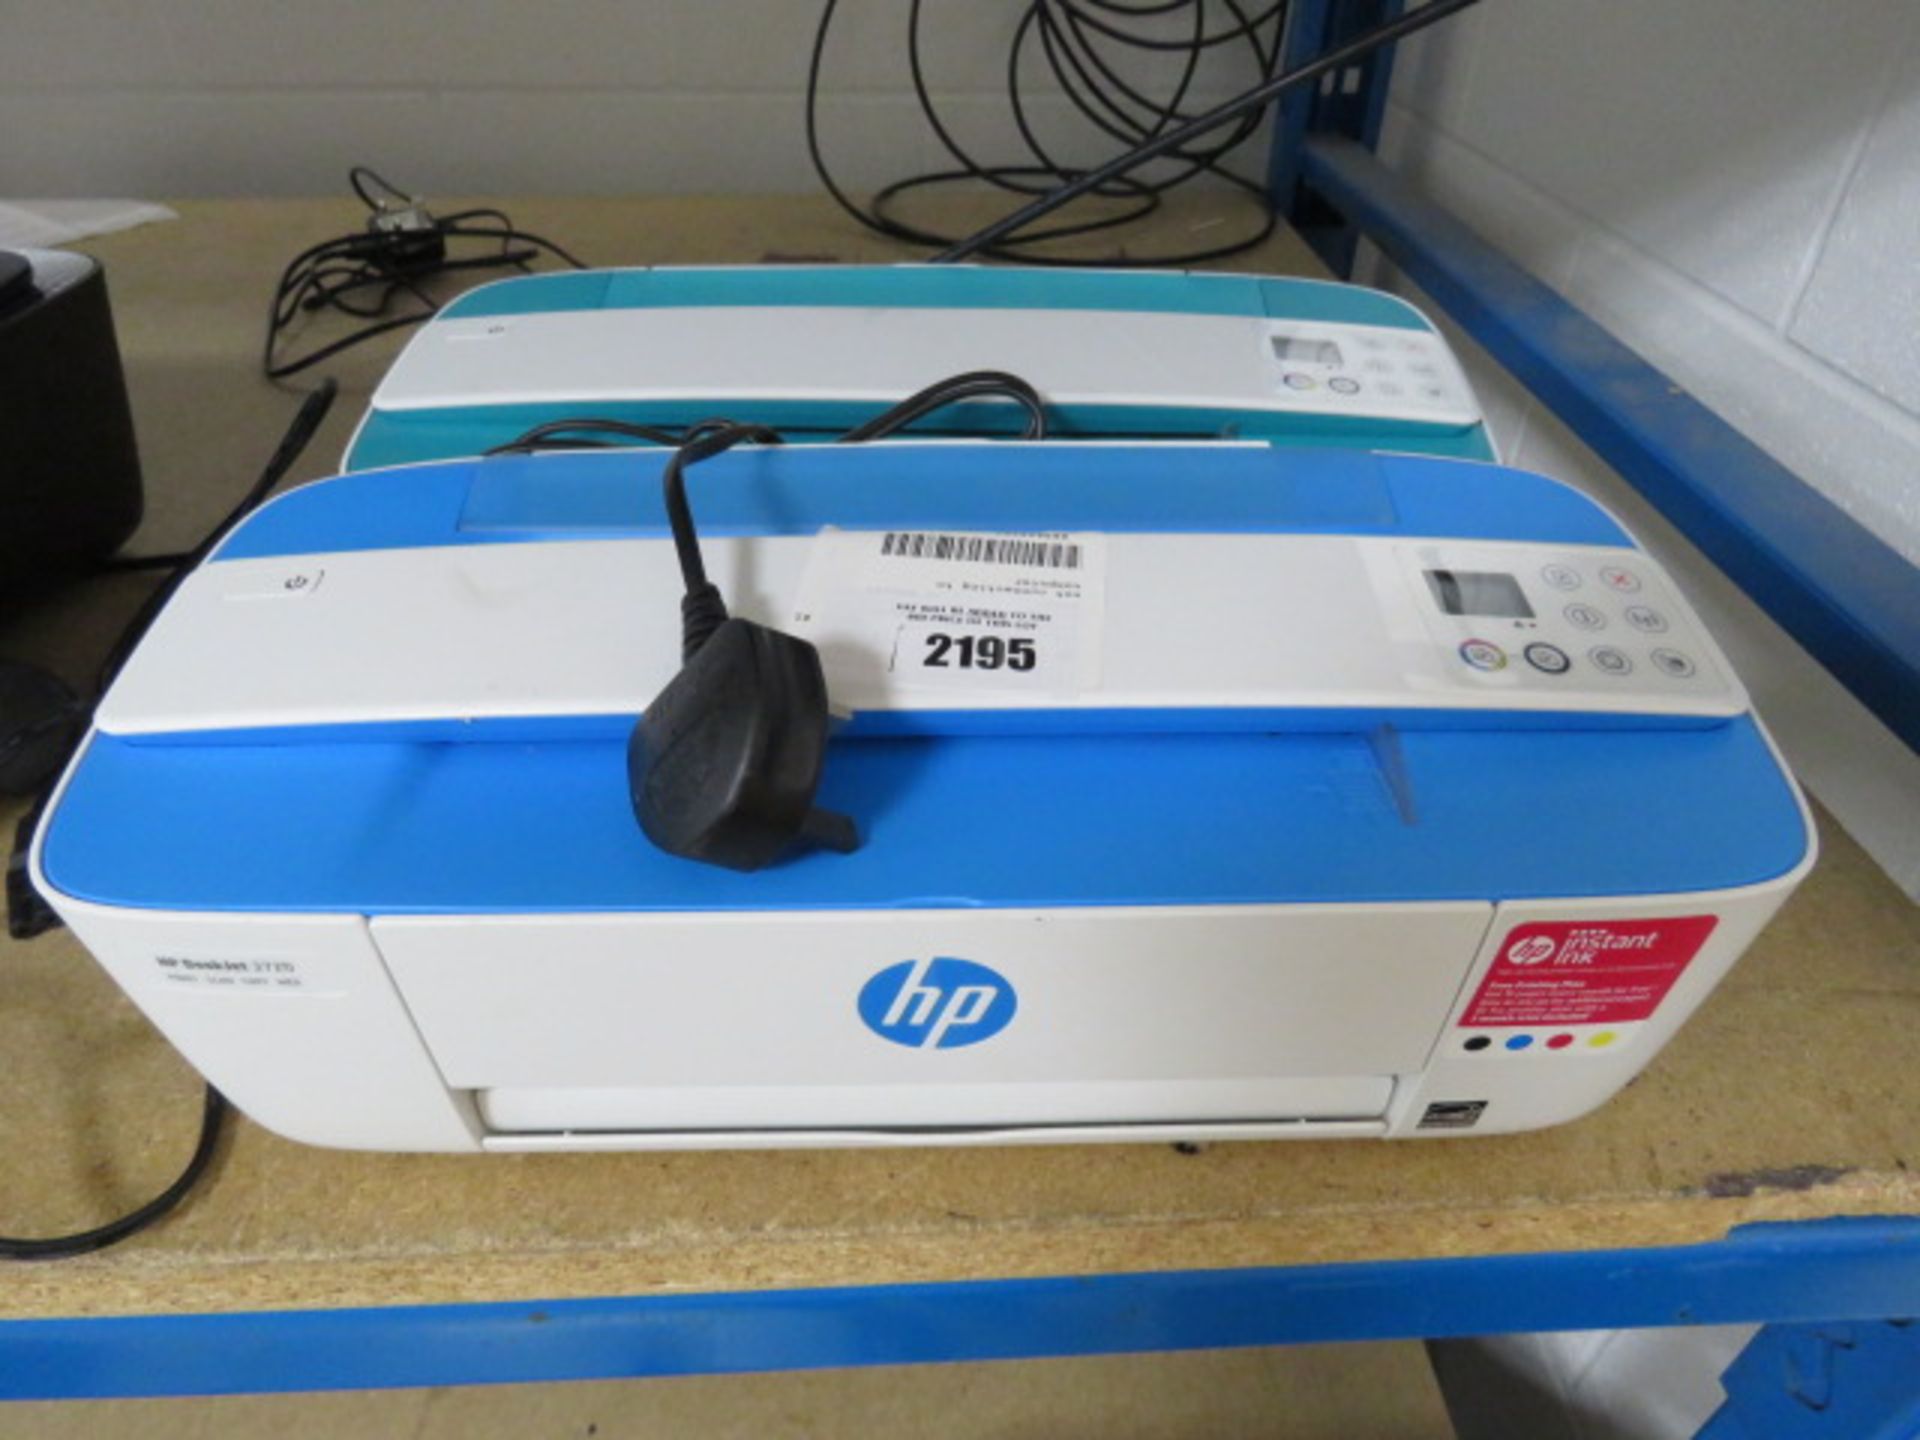 2 HP Deskjet printers to include a HP 3720 - Image 2 of 2